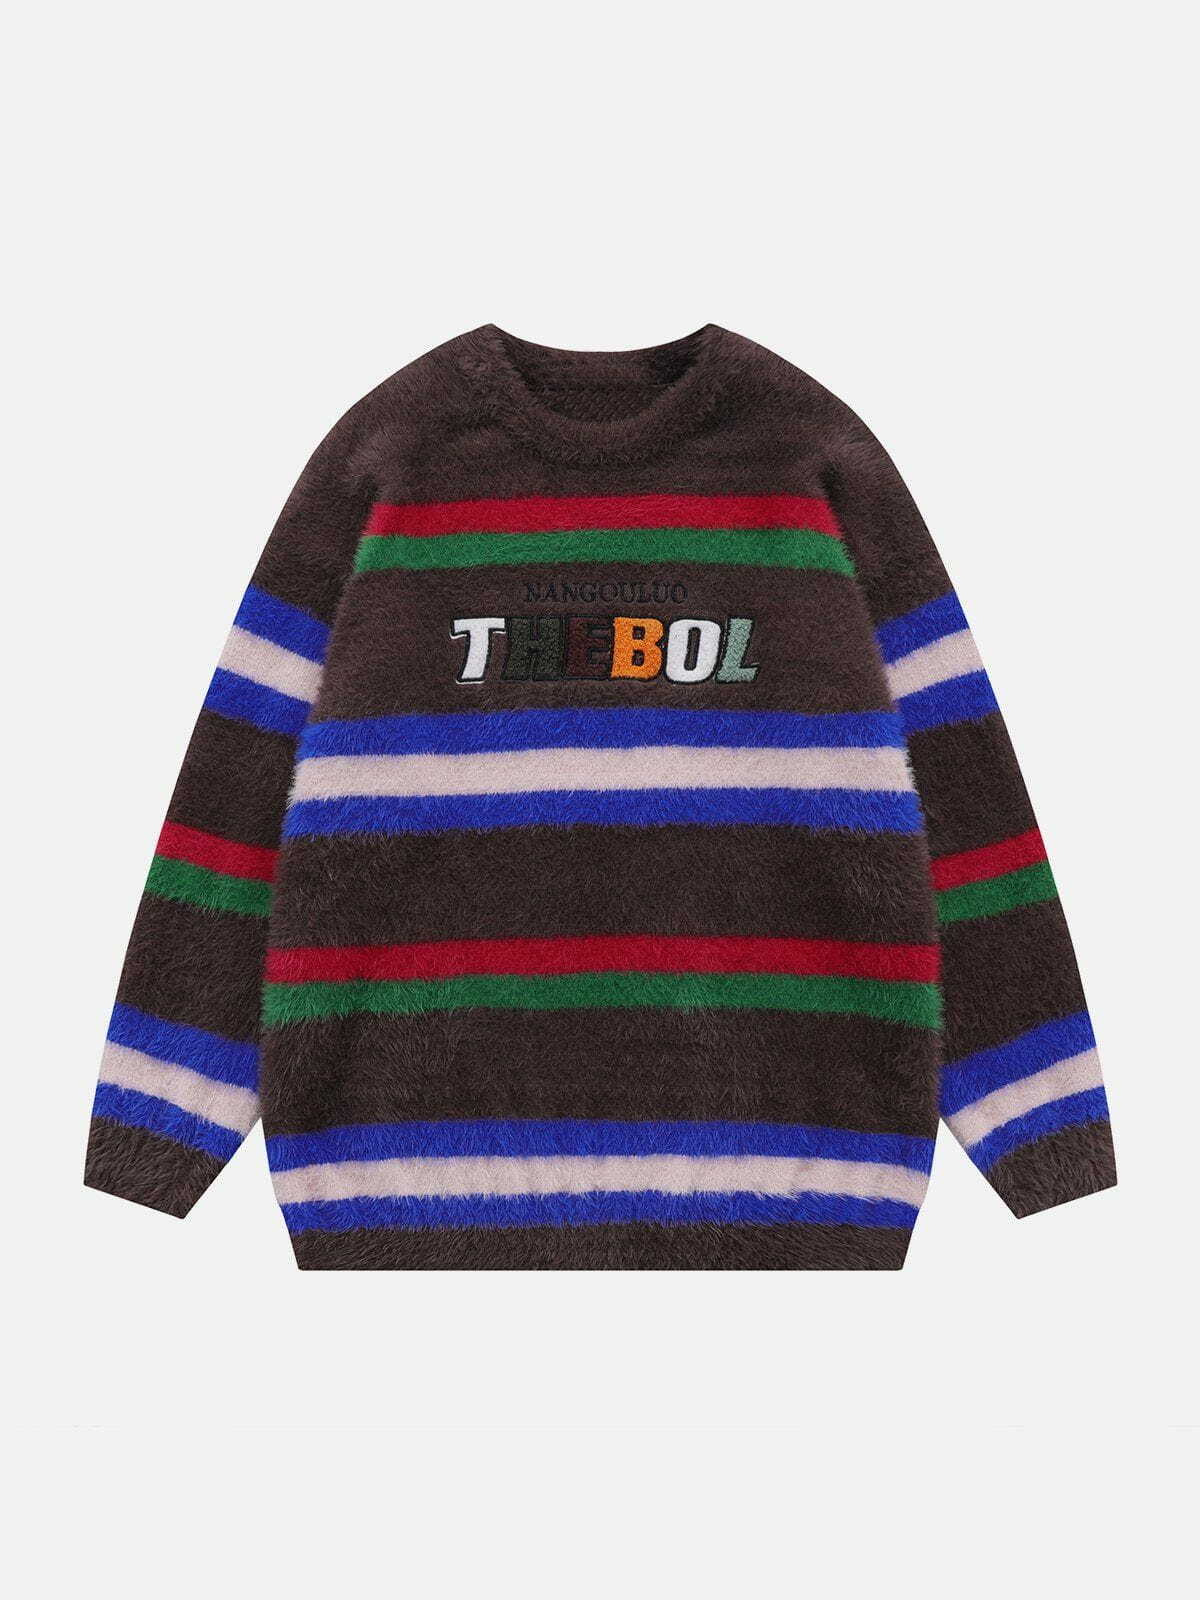 colorful striped letter sweater edgy retro streetwear statement 4372